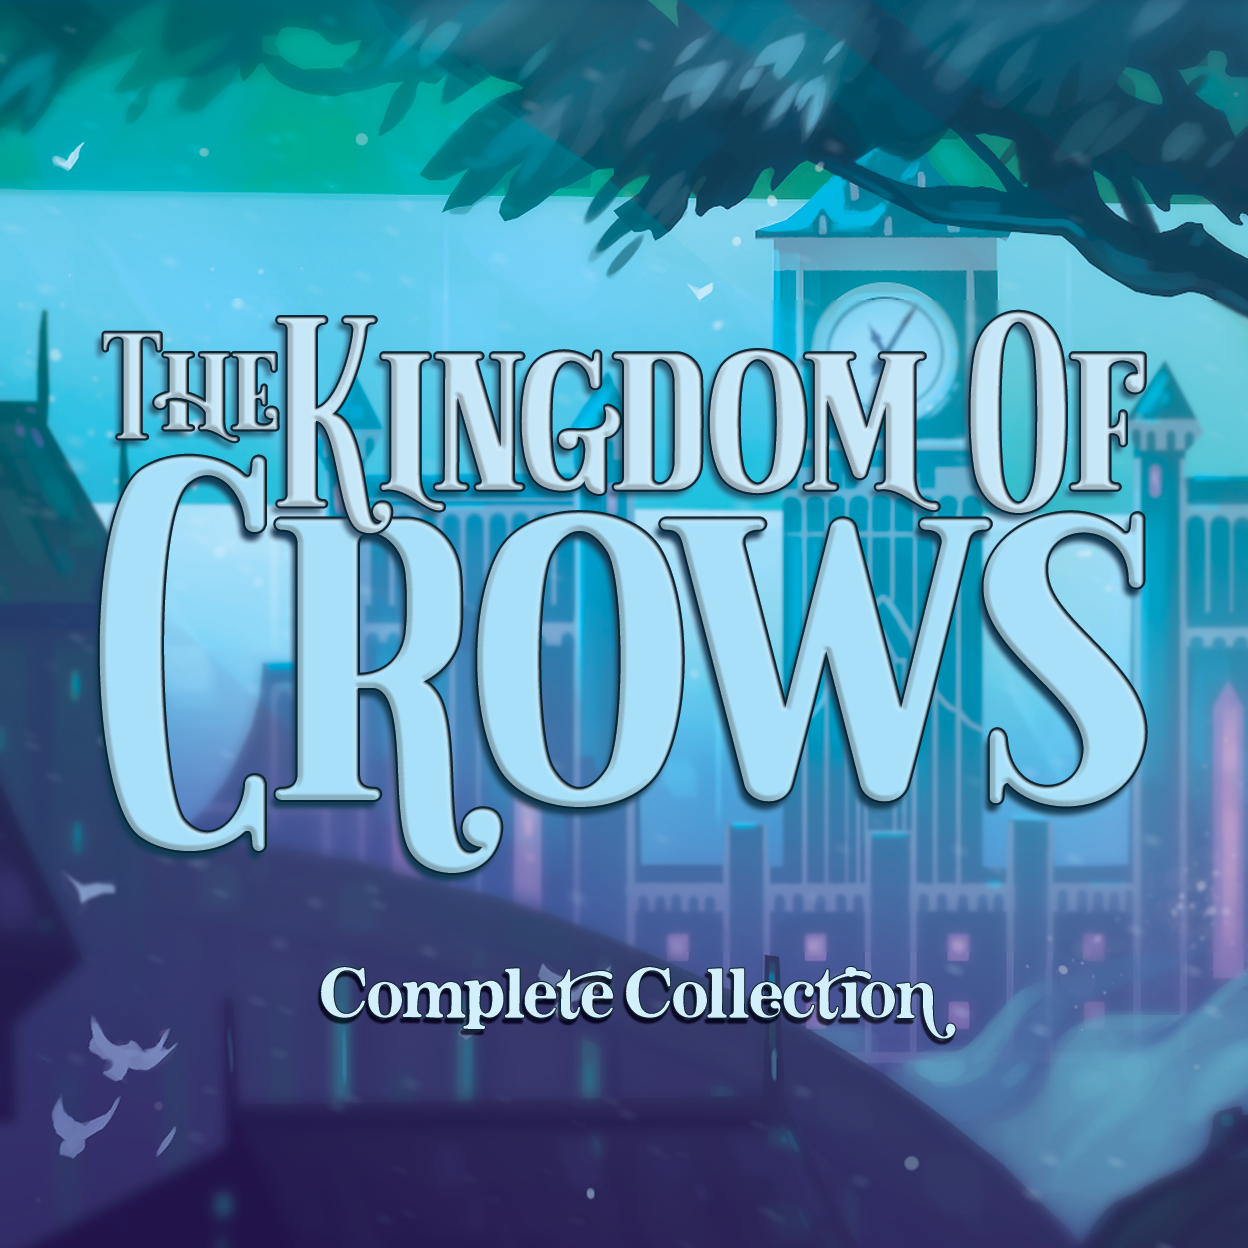 Kingdom of Crows - Complete Collection | Six of Crows Inspired